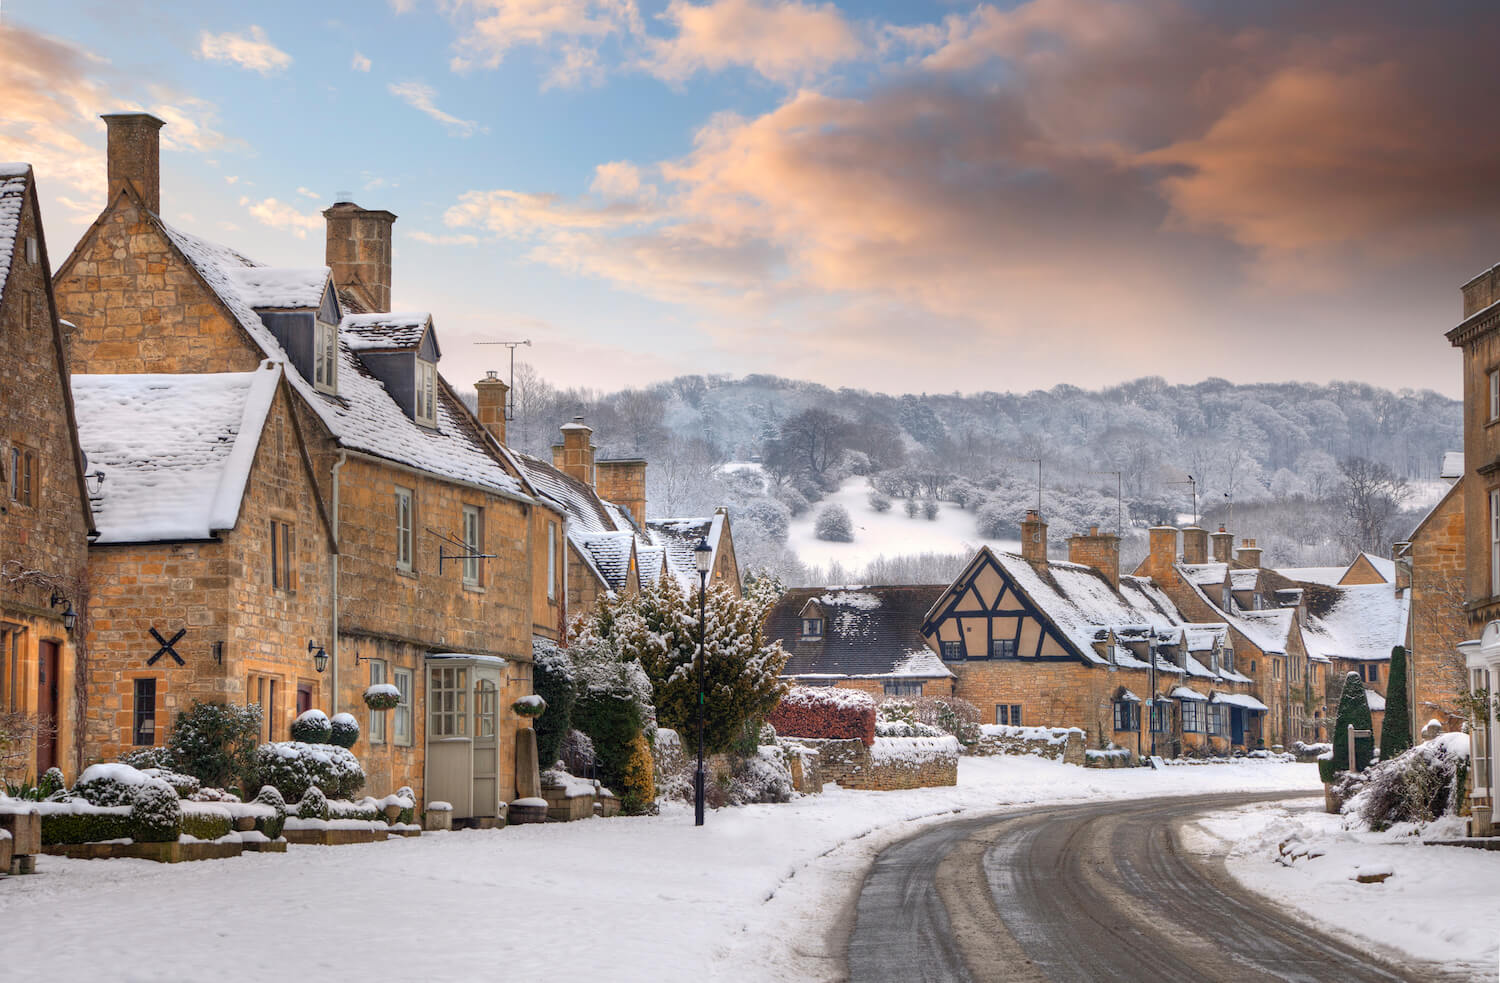 The popular tourist destination of Broadway, Cotswolds, Worcestershire,